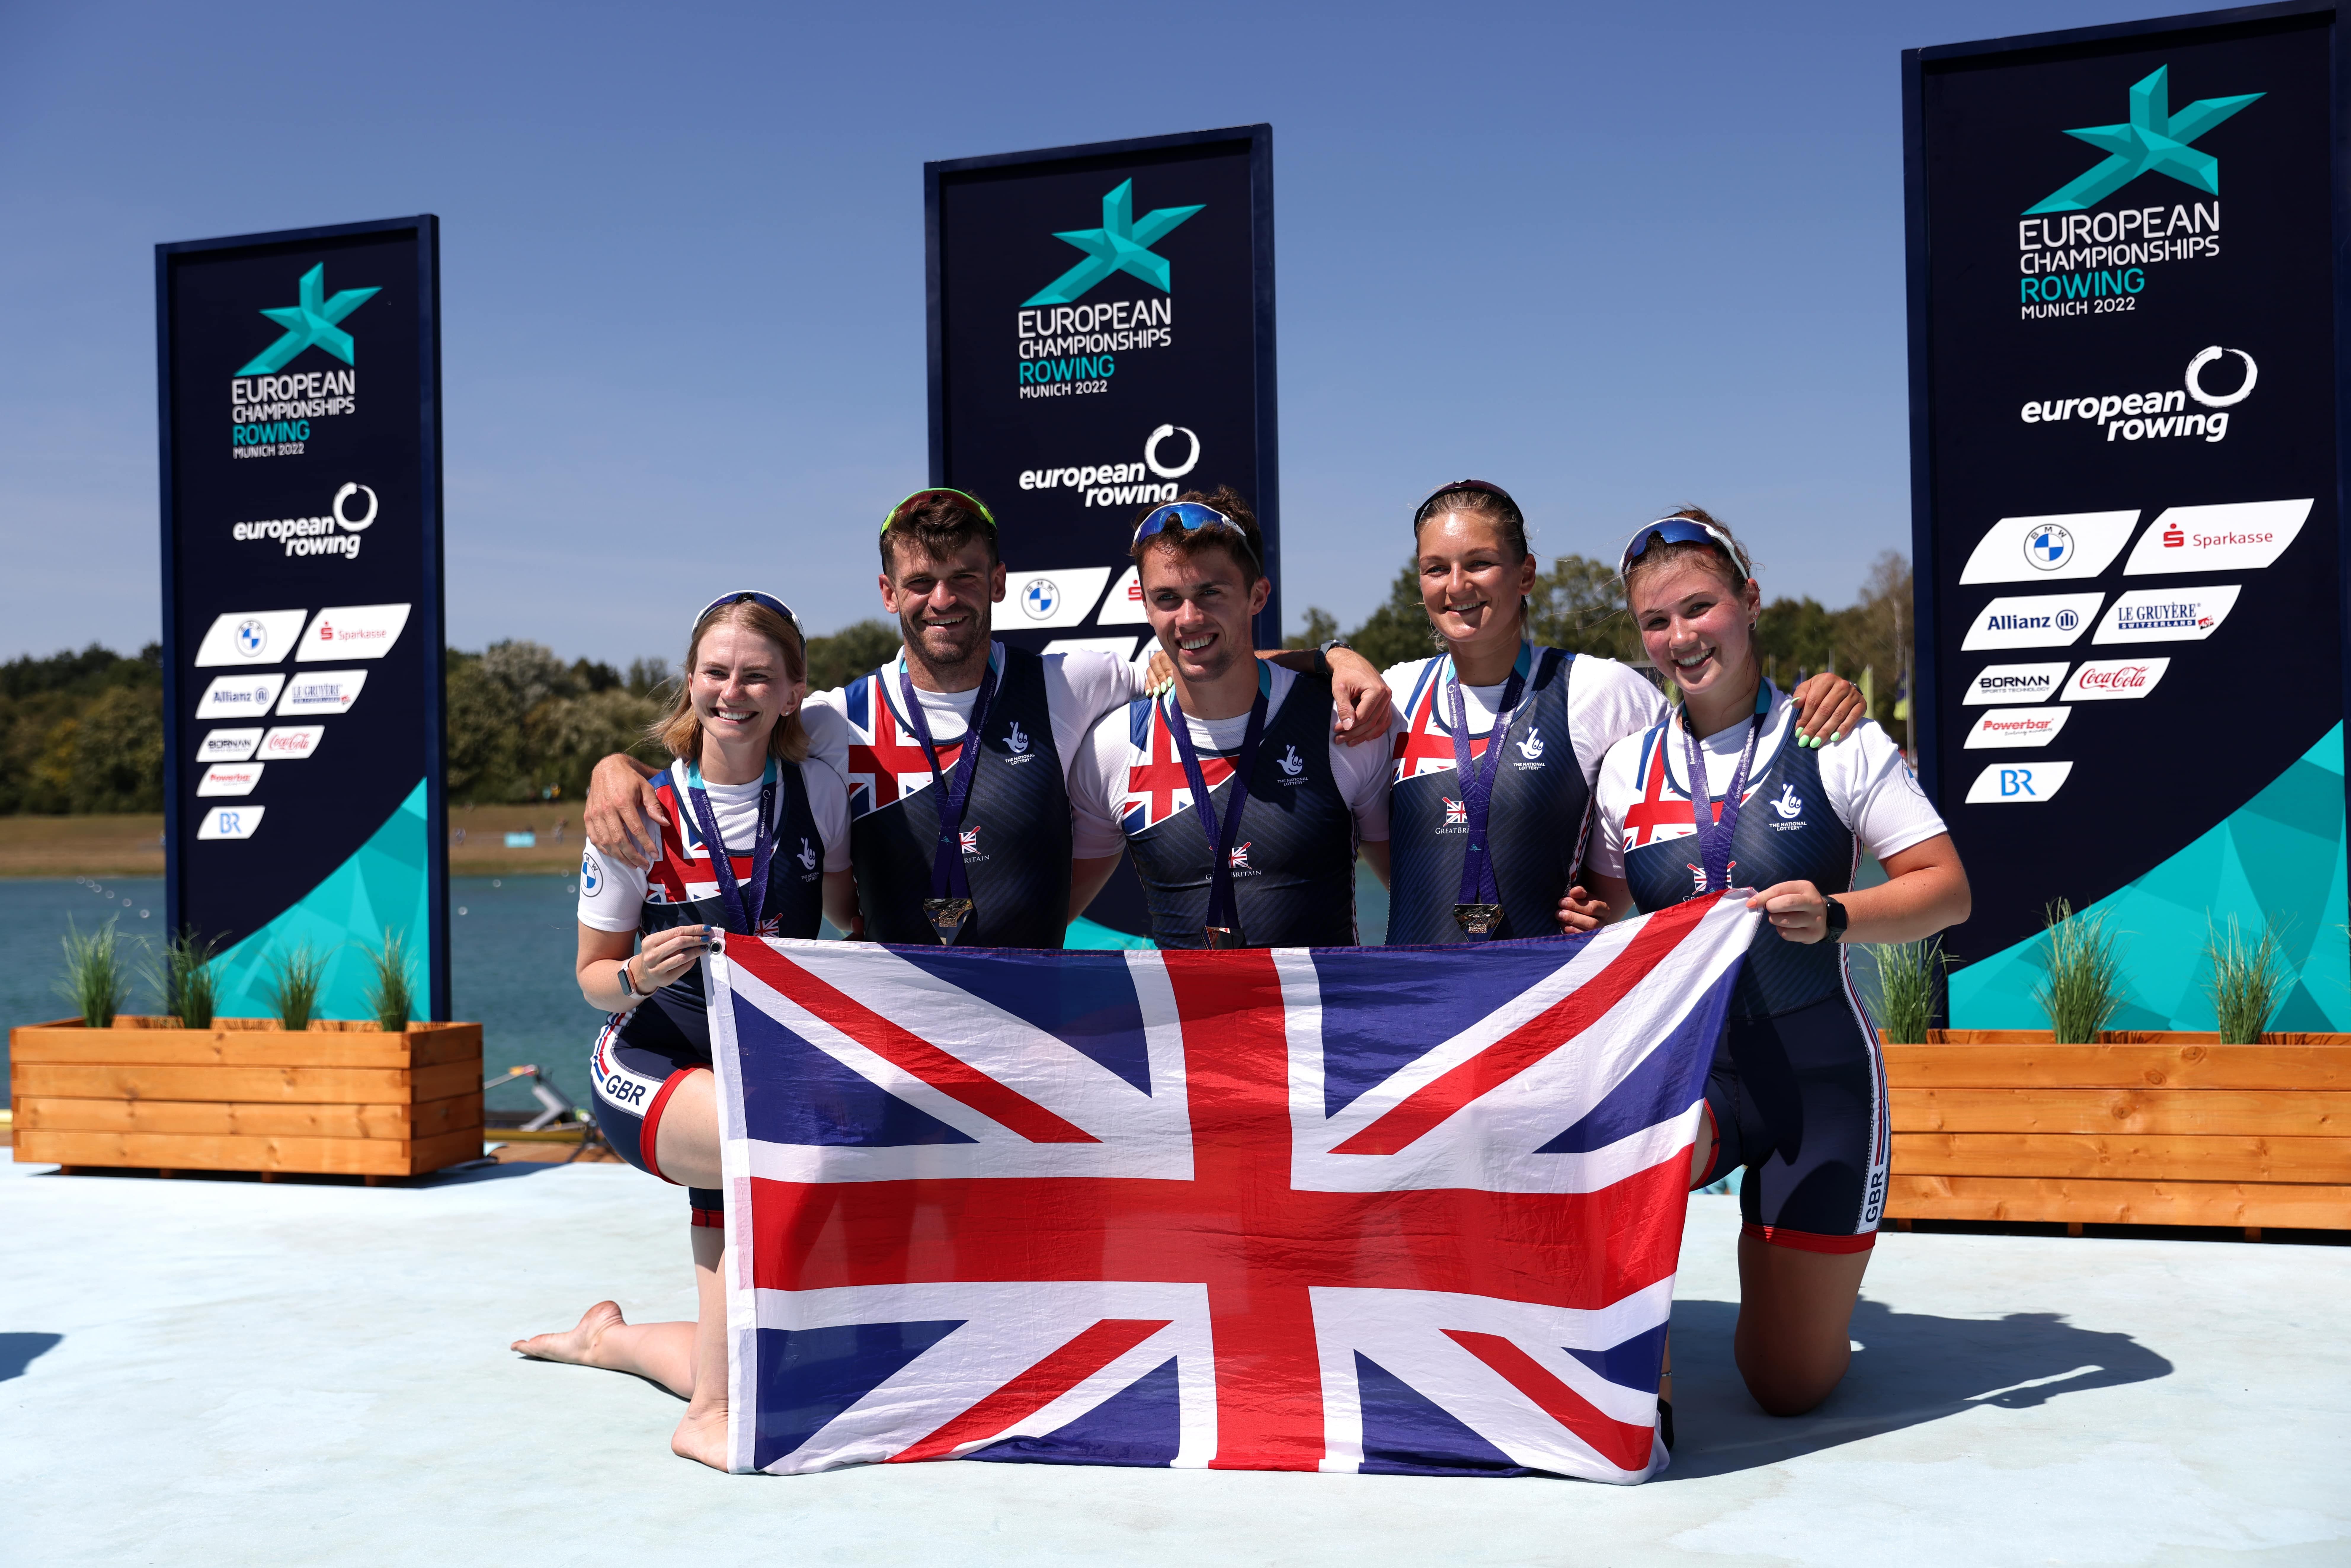 Strong opening session from GB at Europeans - British Rowing